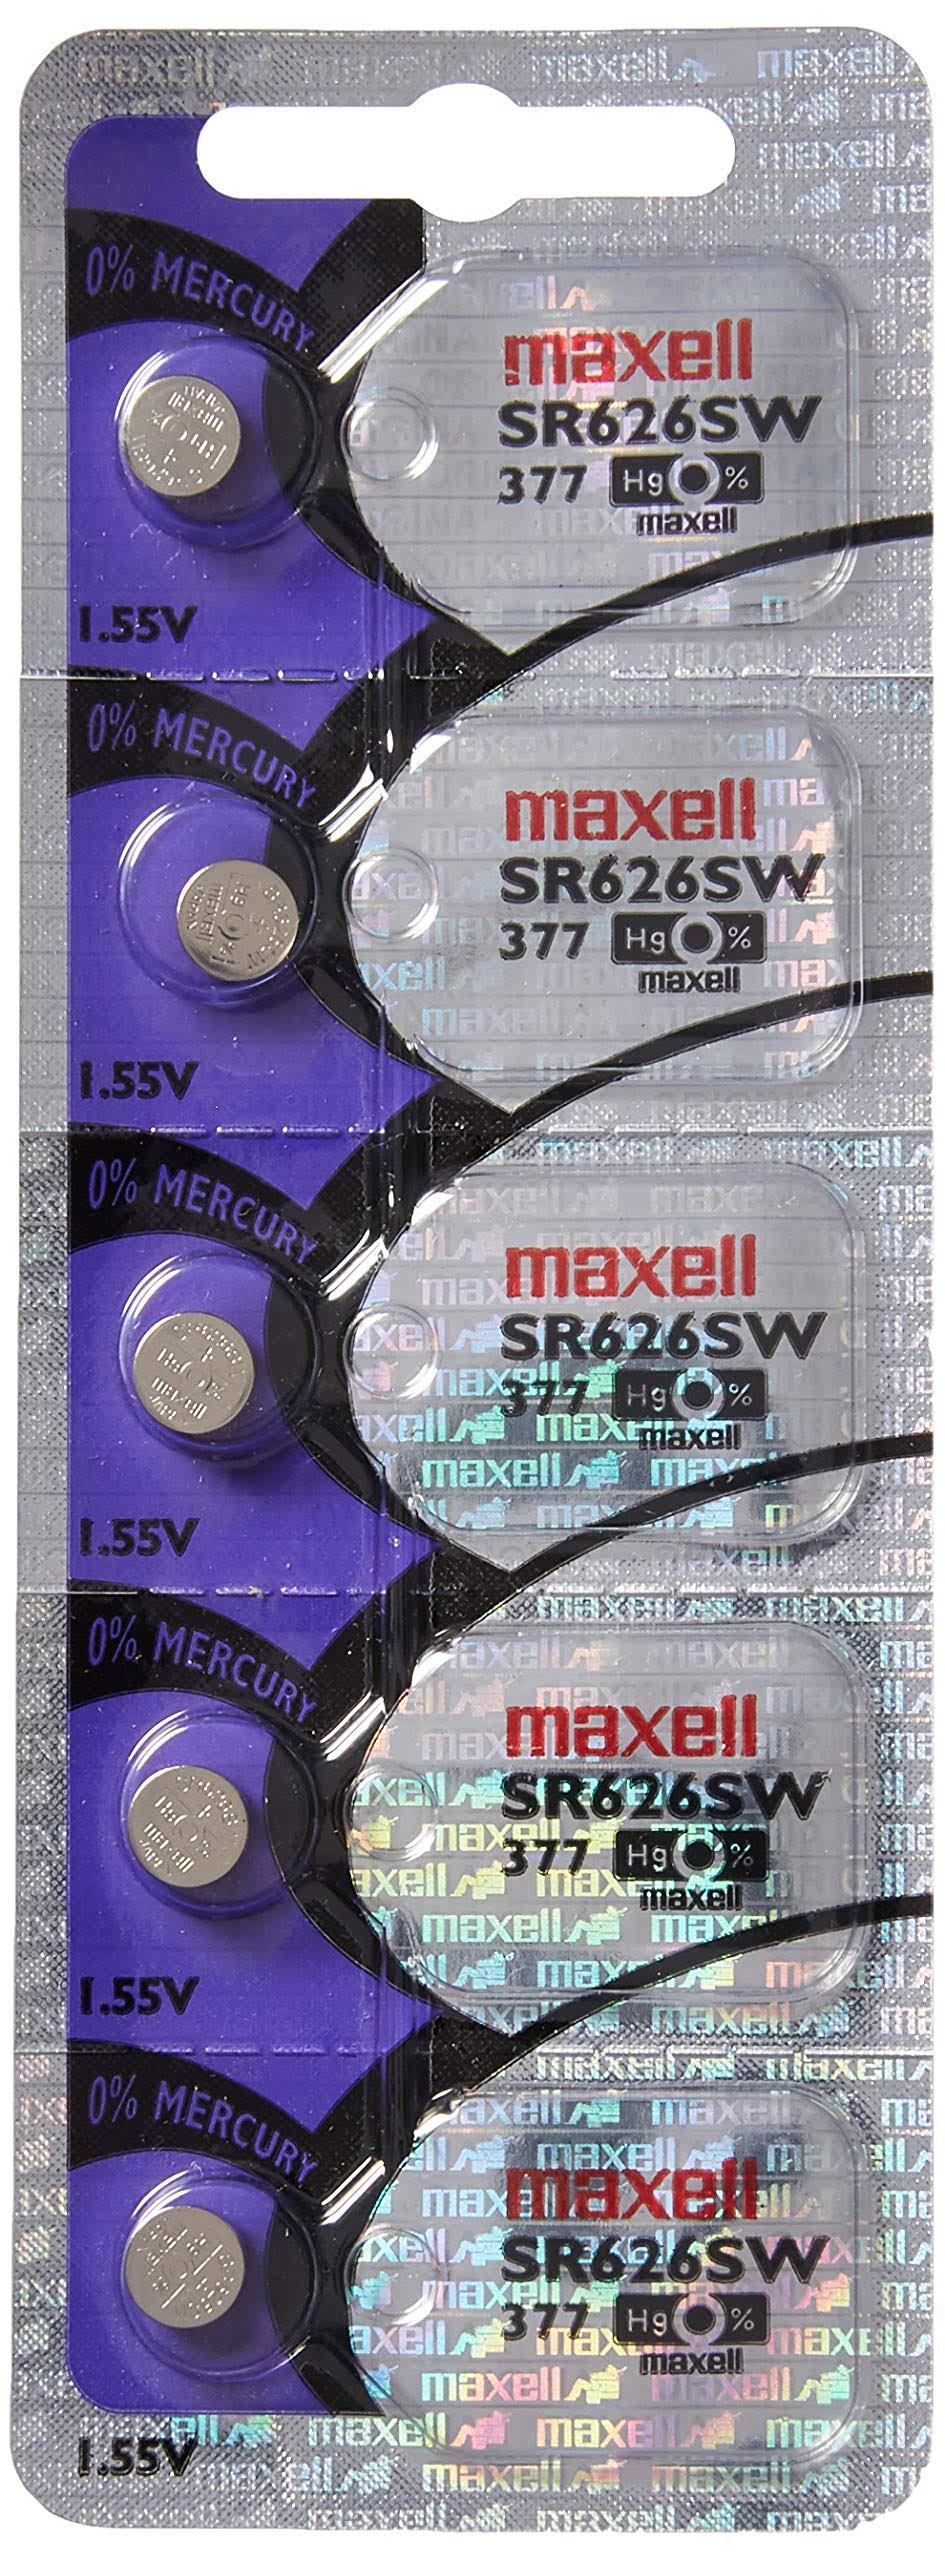 Maxell Silver Oxide Cell Batteries - 5pcs